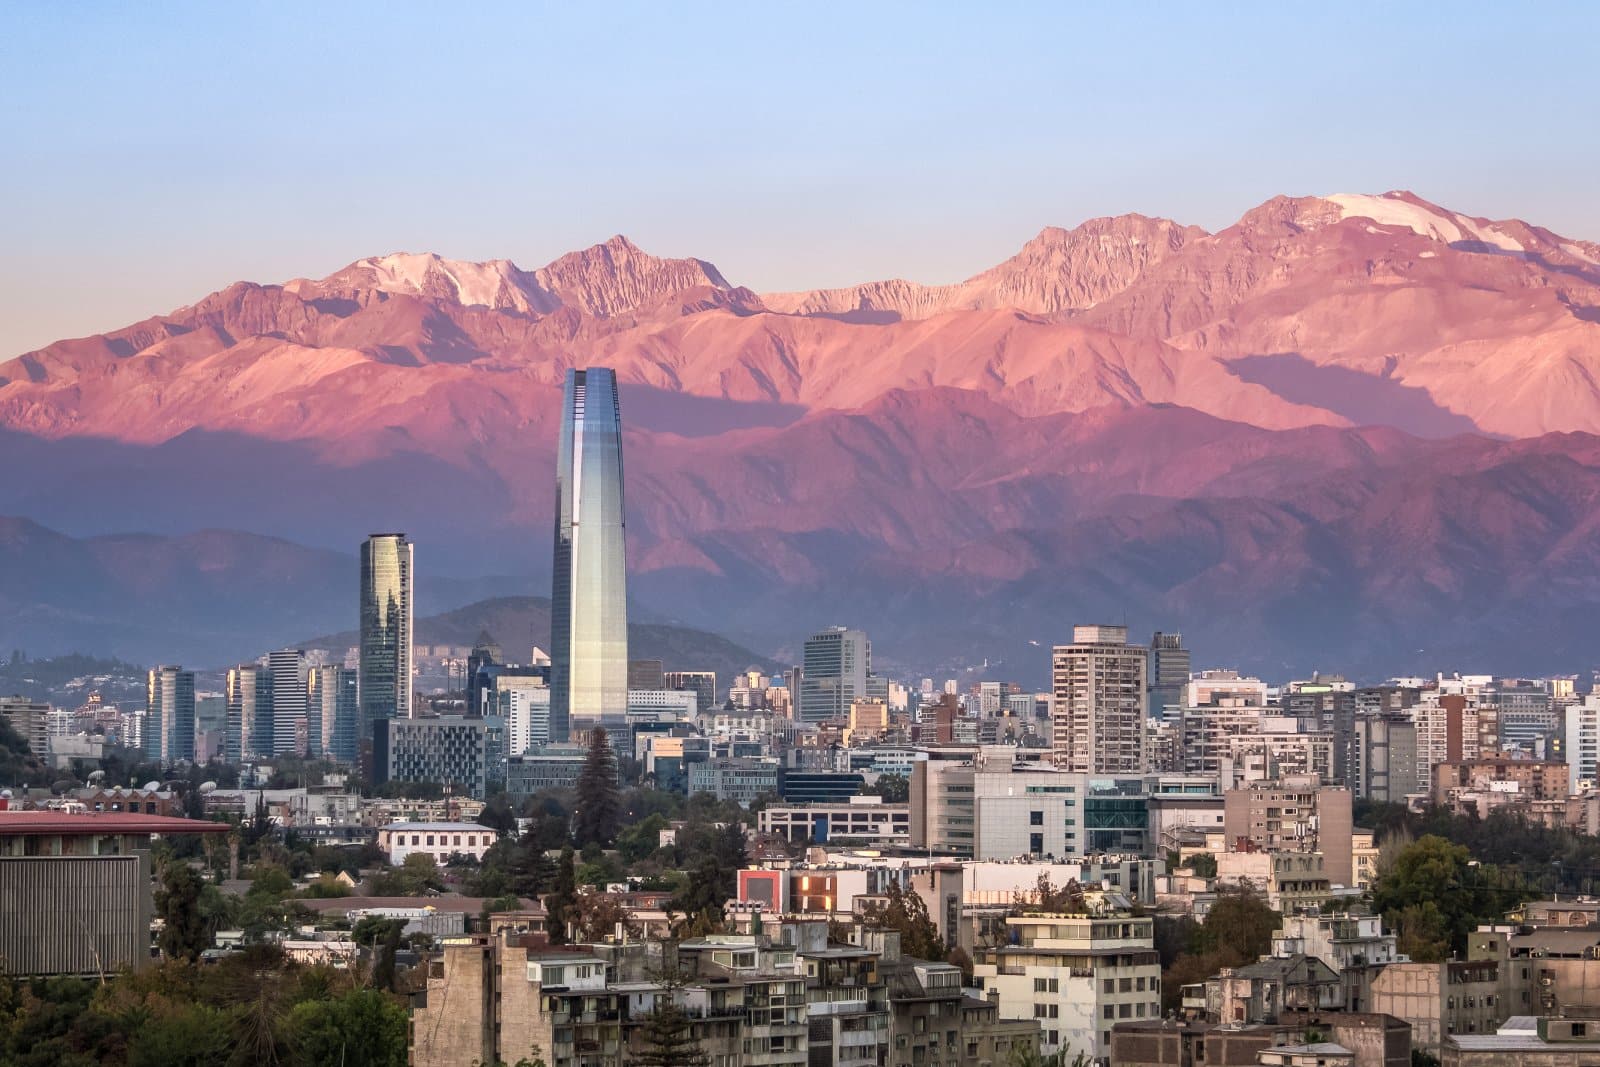 <p class="wp-caption-text">Image Credit: Shutterstock / Diego Grandi</p>  <p><span>Santiago, nestled in the Andes’ foothills, offers a compelling mix of urban sophistication and natural beauty, making it an attractive destination for students interested in Latin American culture, Spanish language, and environmental studies. The city’s universities are engaged in addressing the region’s social, political, and environmental challenges, providing meaningful academic pursuits. Santiago’s proximity to the mountains and the sea allows for various outdoor activities, complementing the academic experience with adventure and exploration.</span></p>